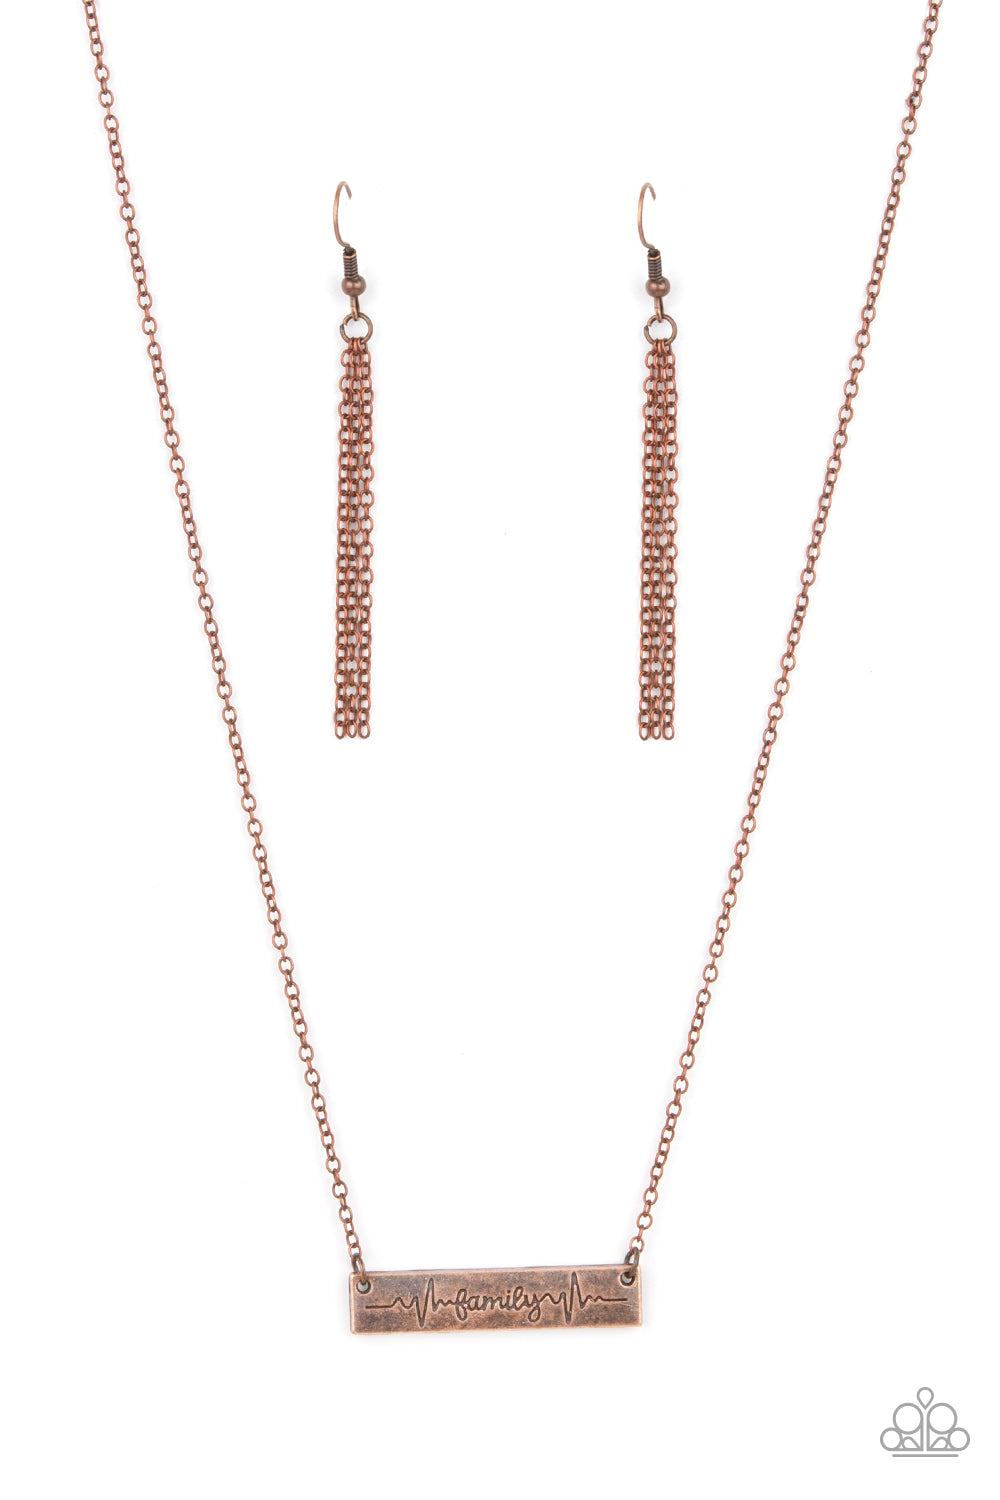 five-dollar-jewelry-living-the-mom-life-copper-necklace-paparazzi-accessories